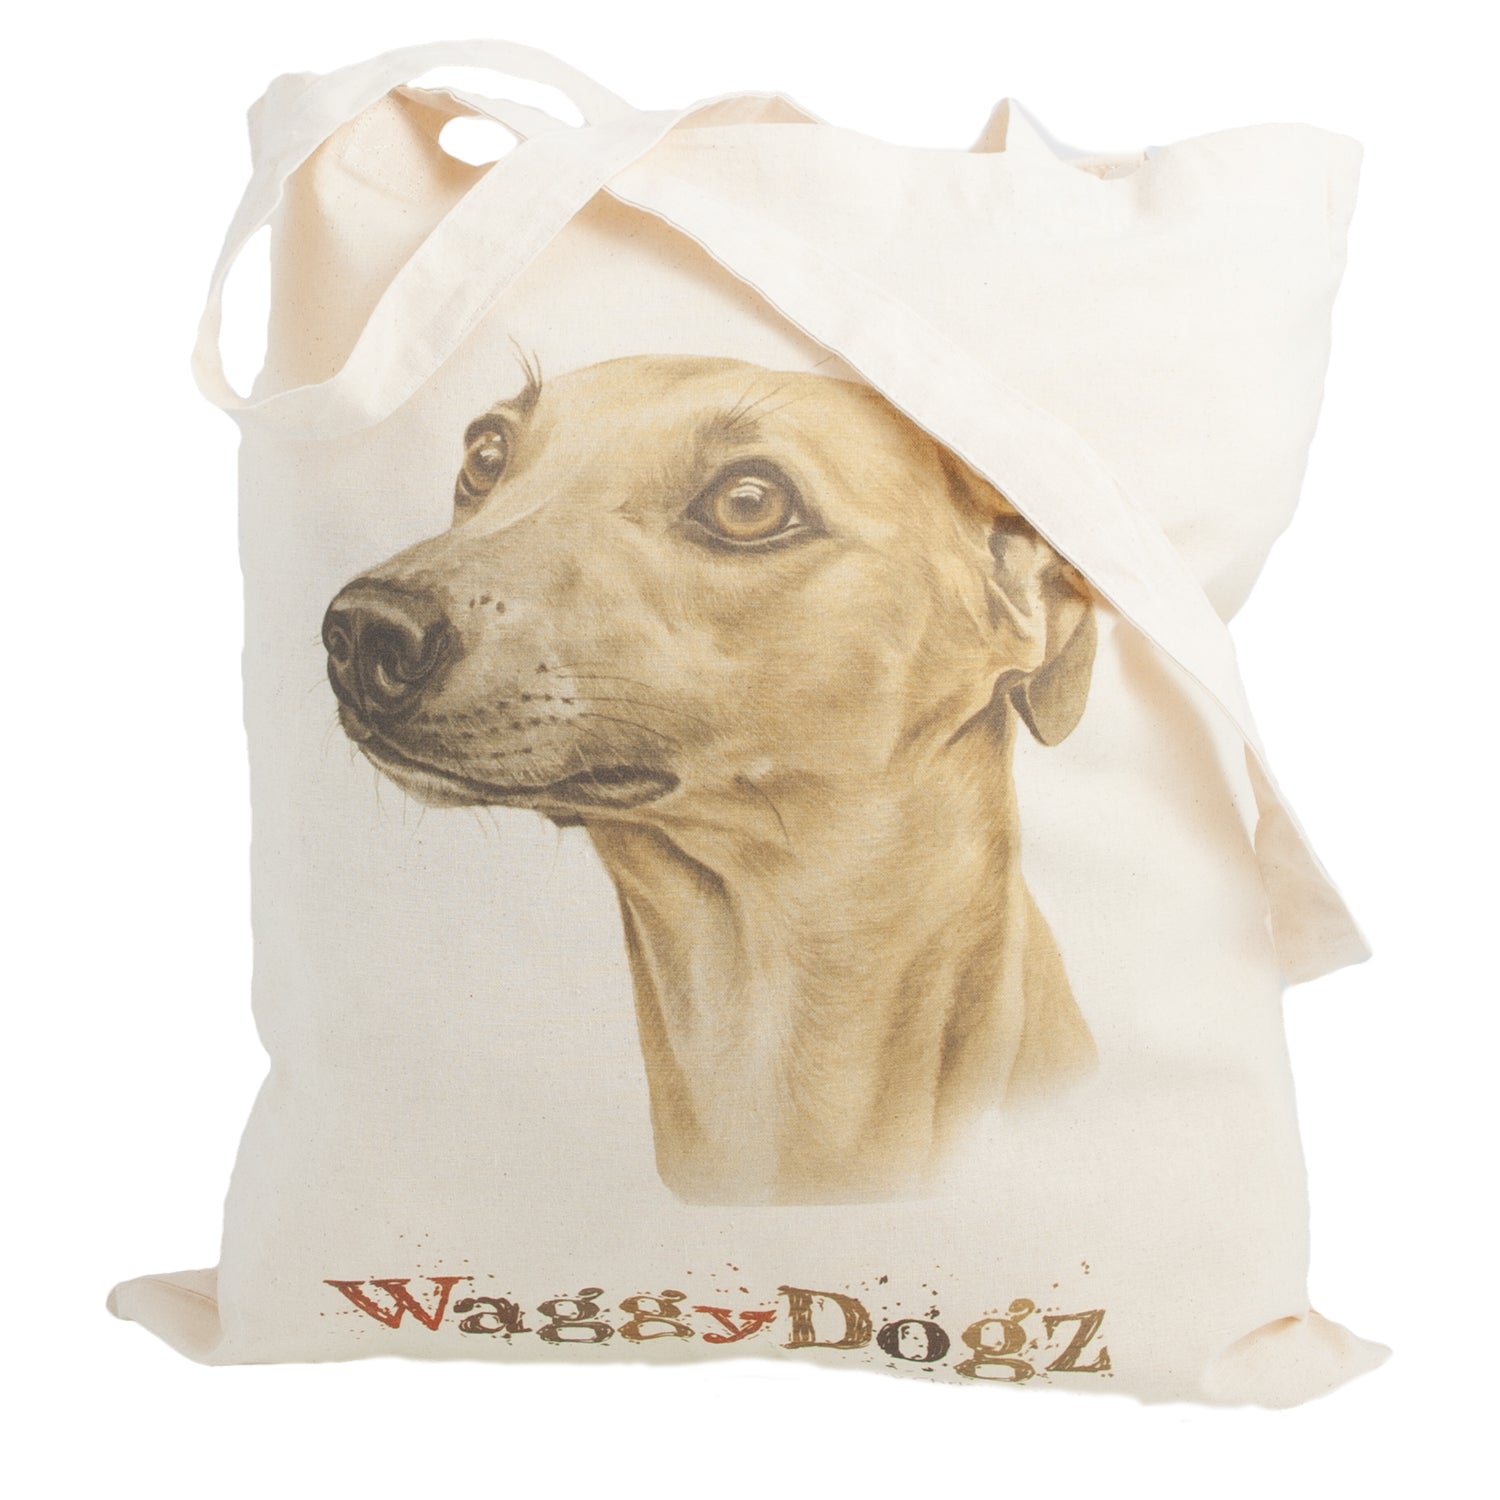 Dog Lover Gifts available at Dog Krazy Gifts. Fawn Whippet Tote Bag, part of our Christine Varley collection – available at www.dogkrazygifts.co.uk